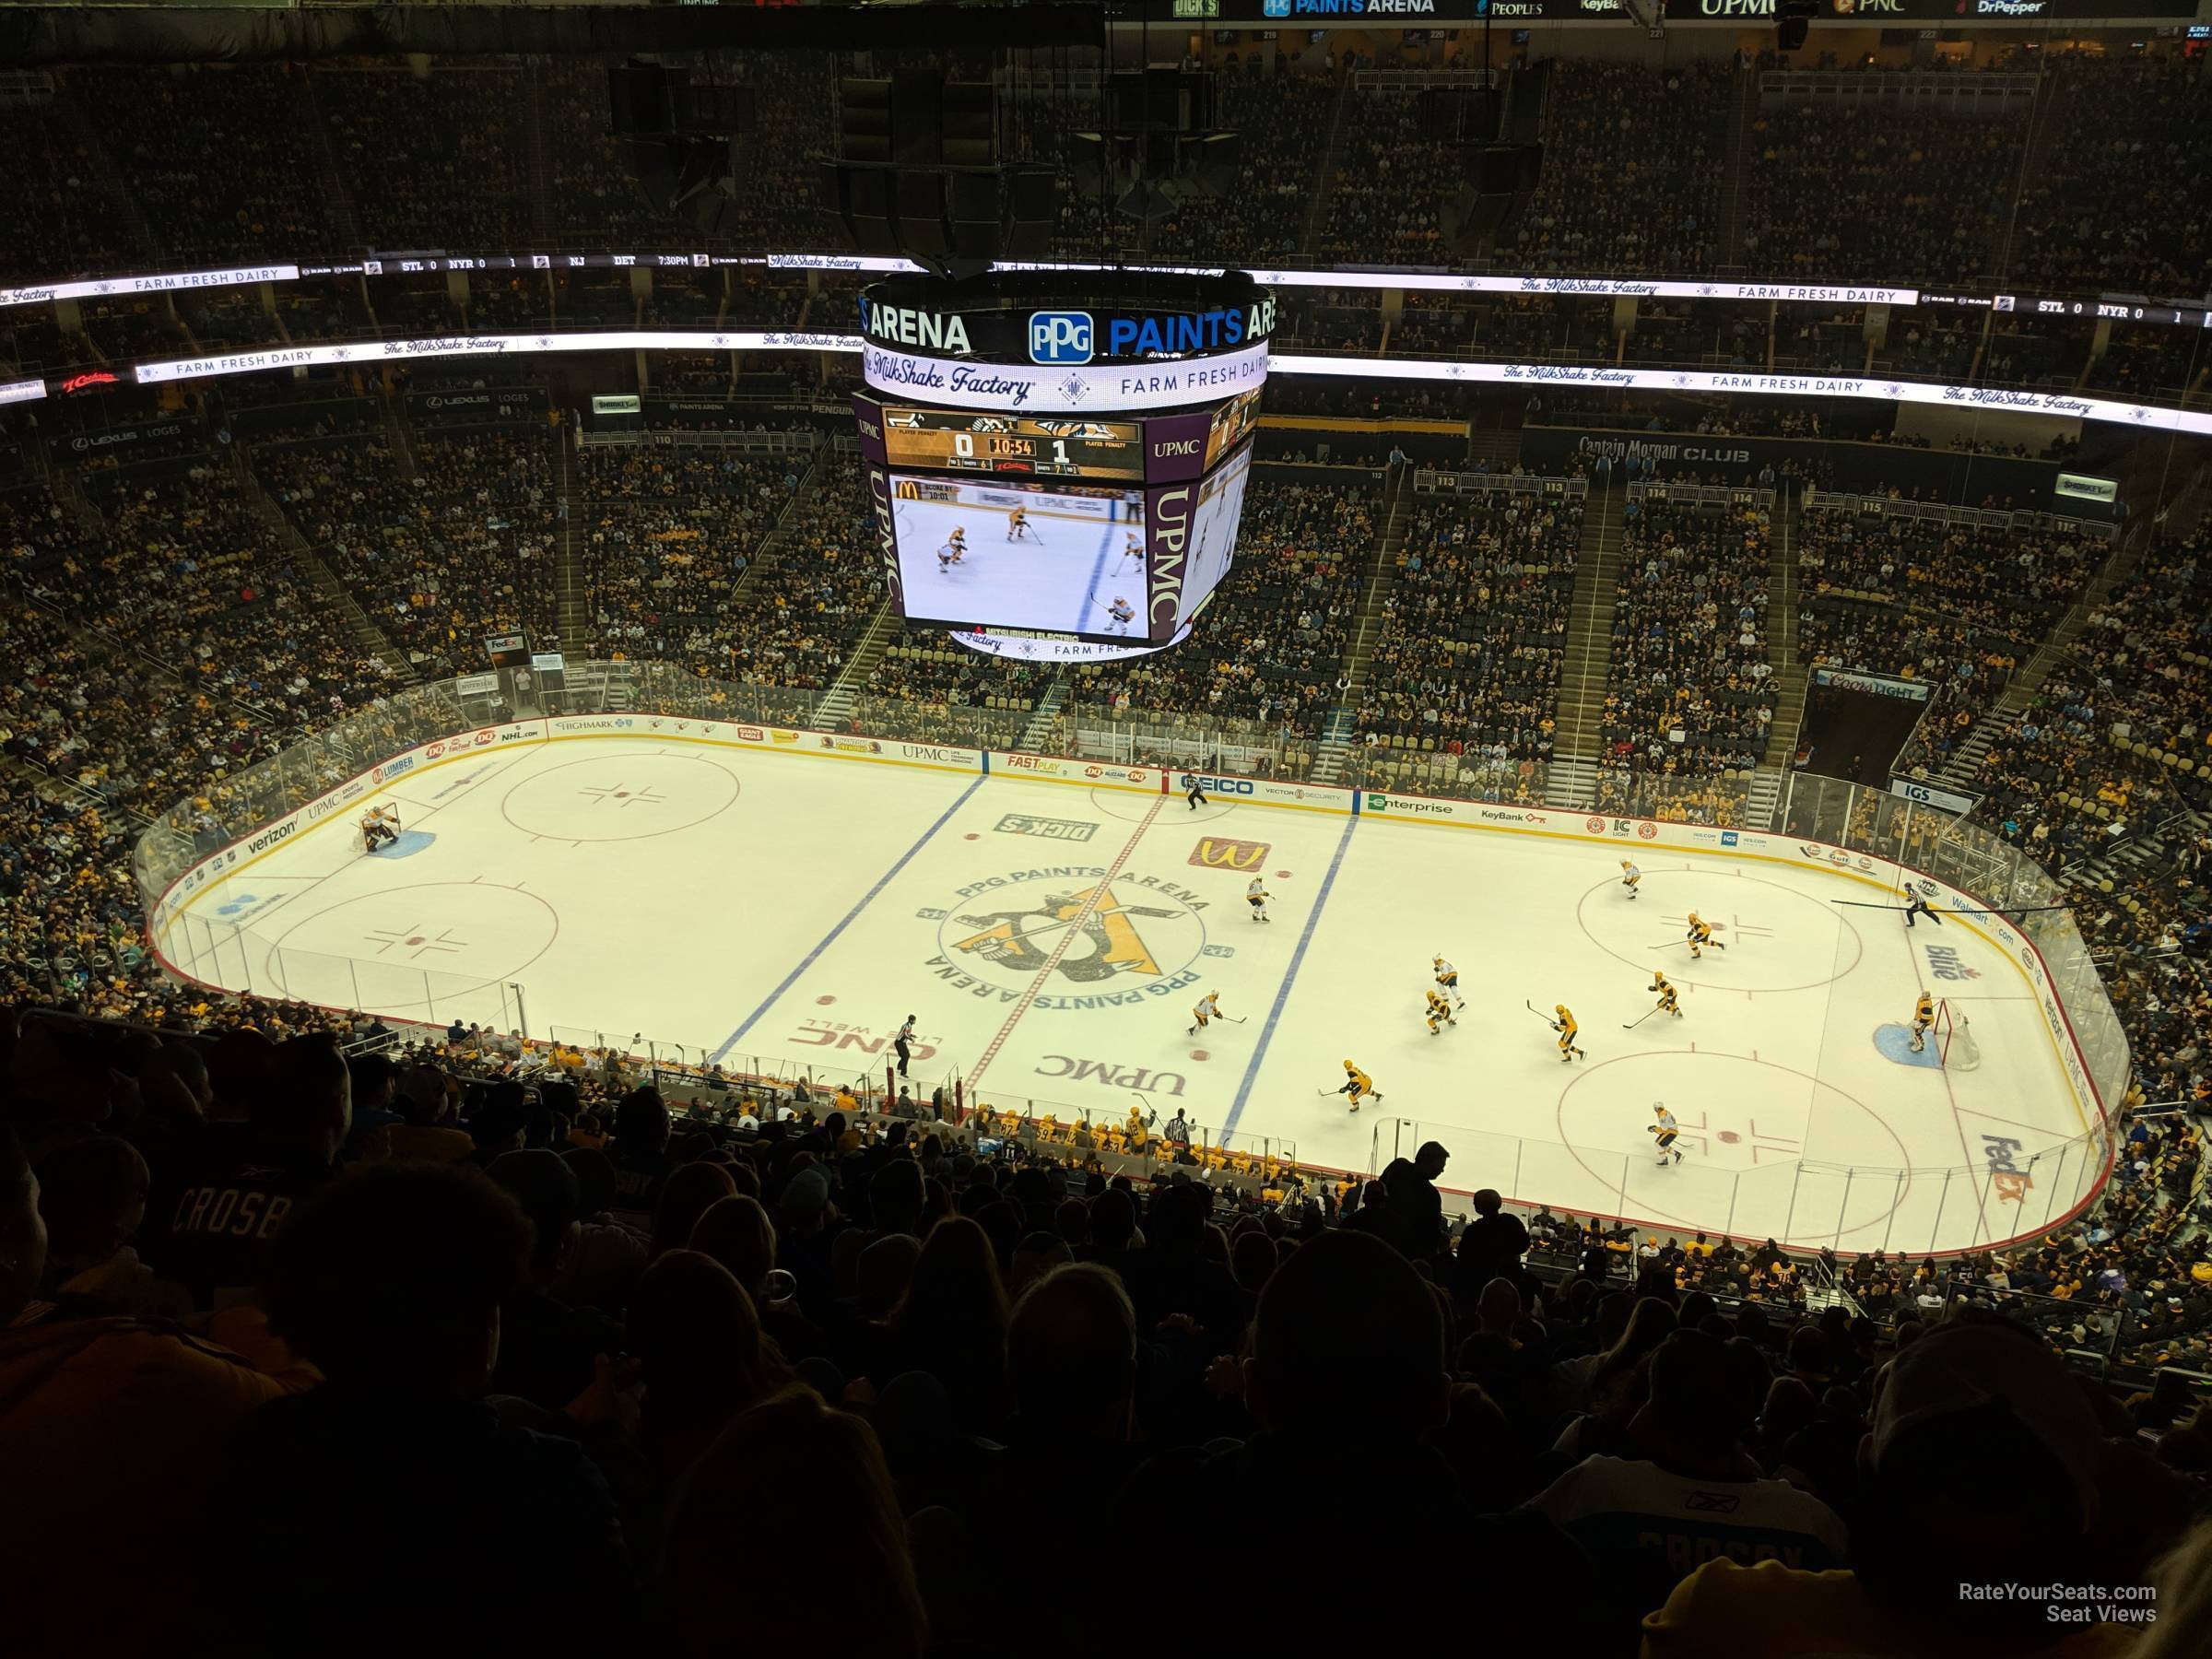 section 201, row sro seat view  for hockey - ppg paints arena